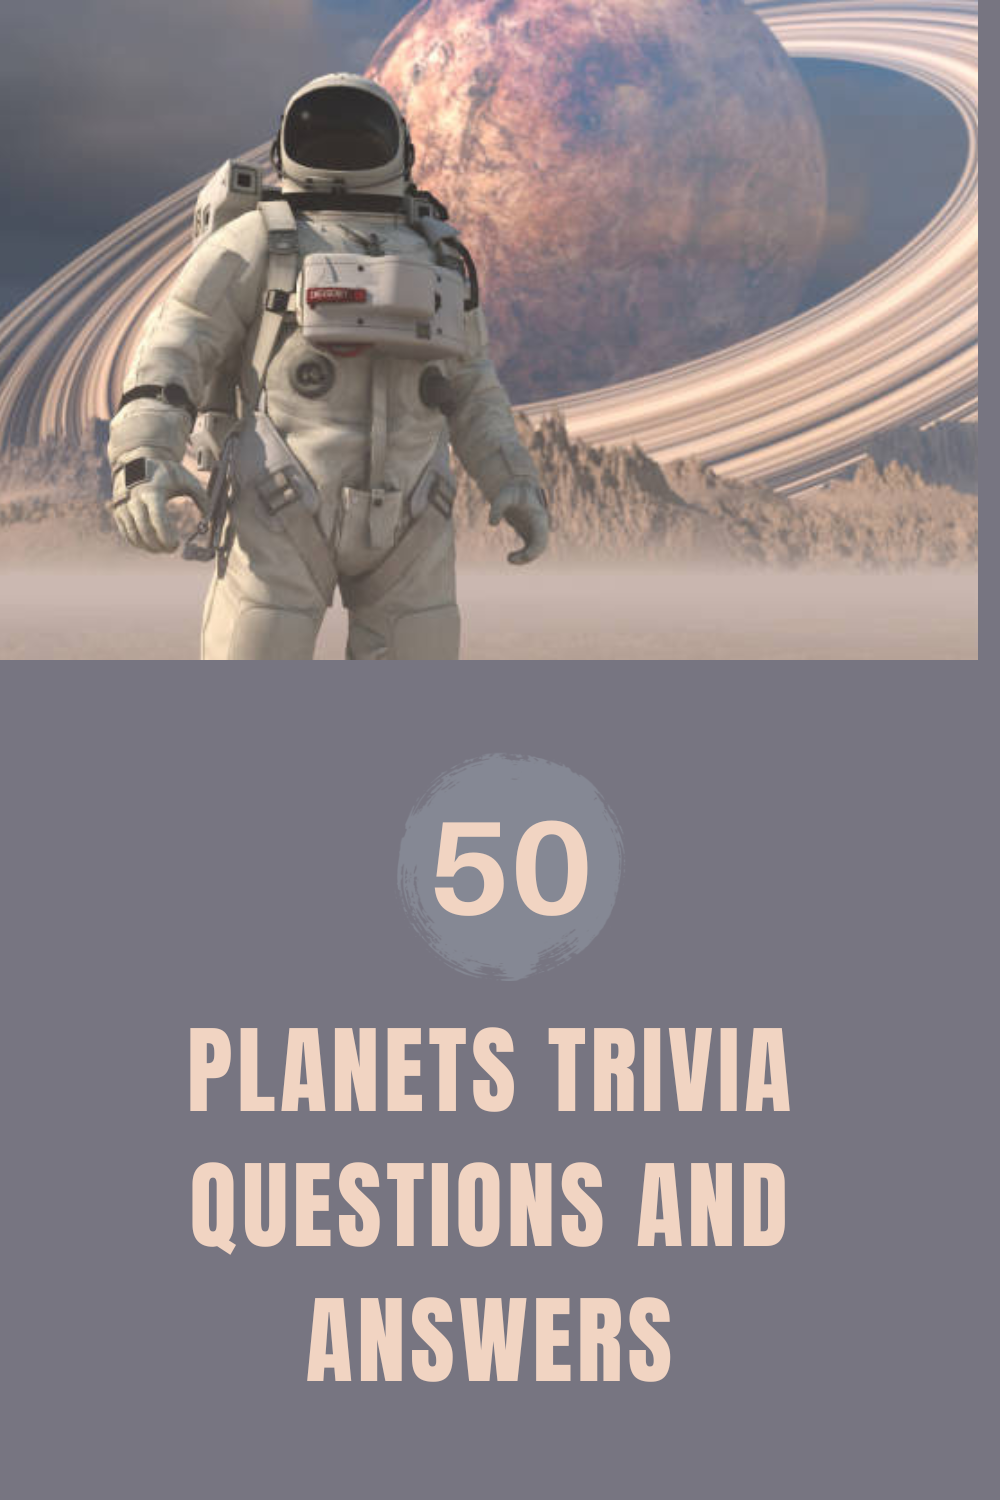 50 Planets Trivia Questions and Answers